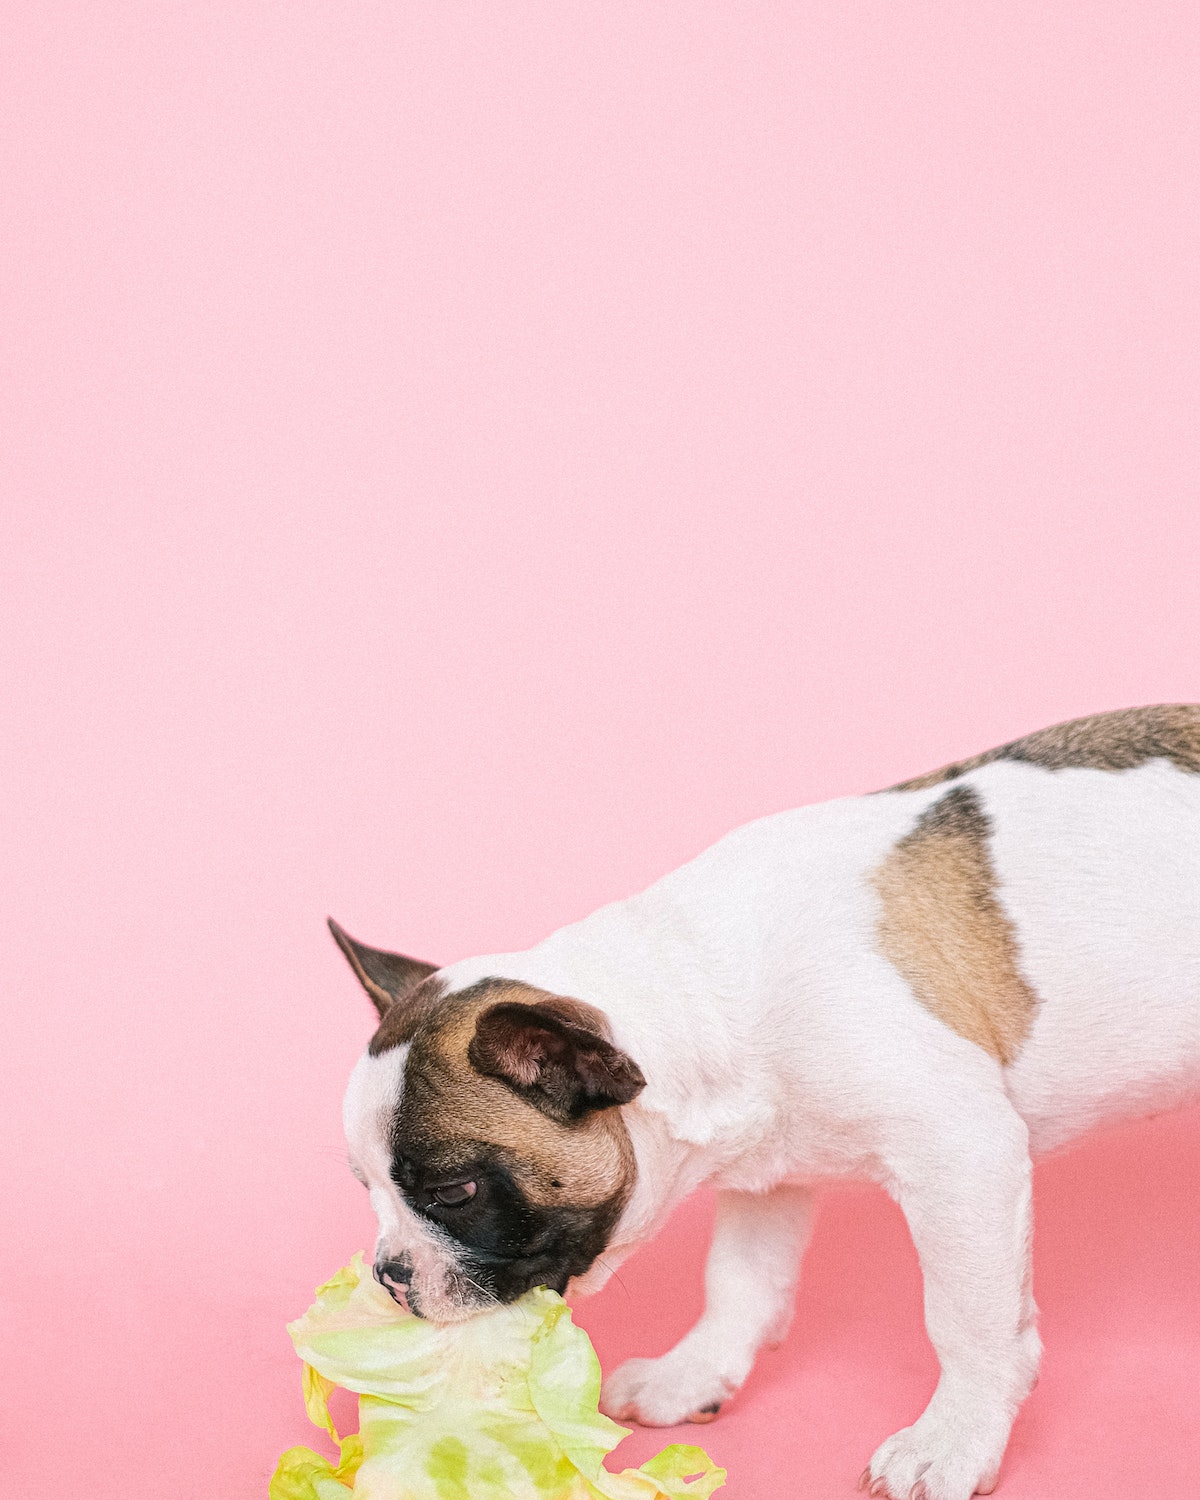 Dog eating cabbage leaf with pink background.